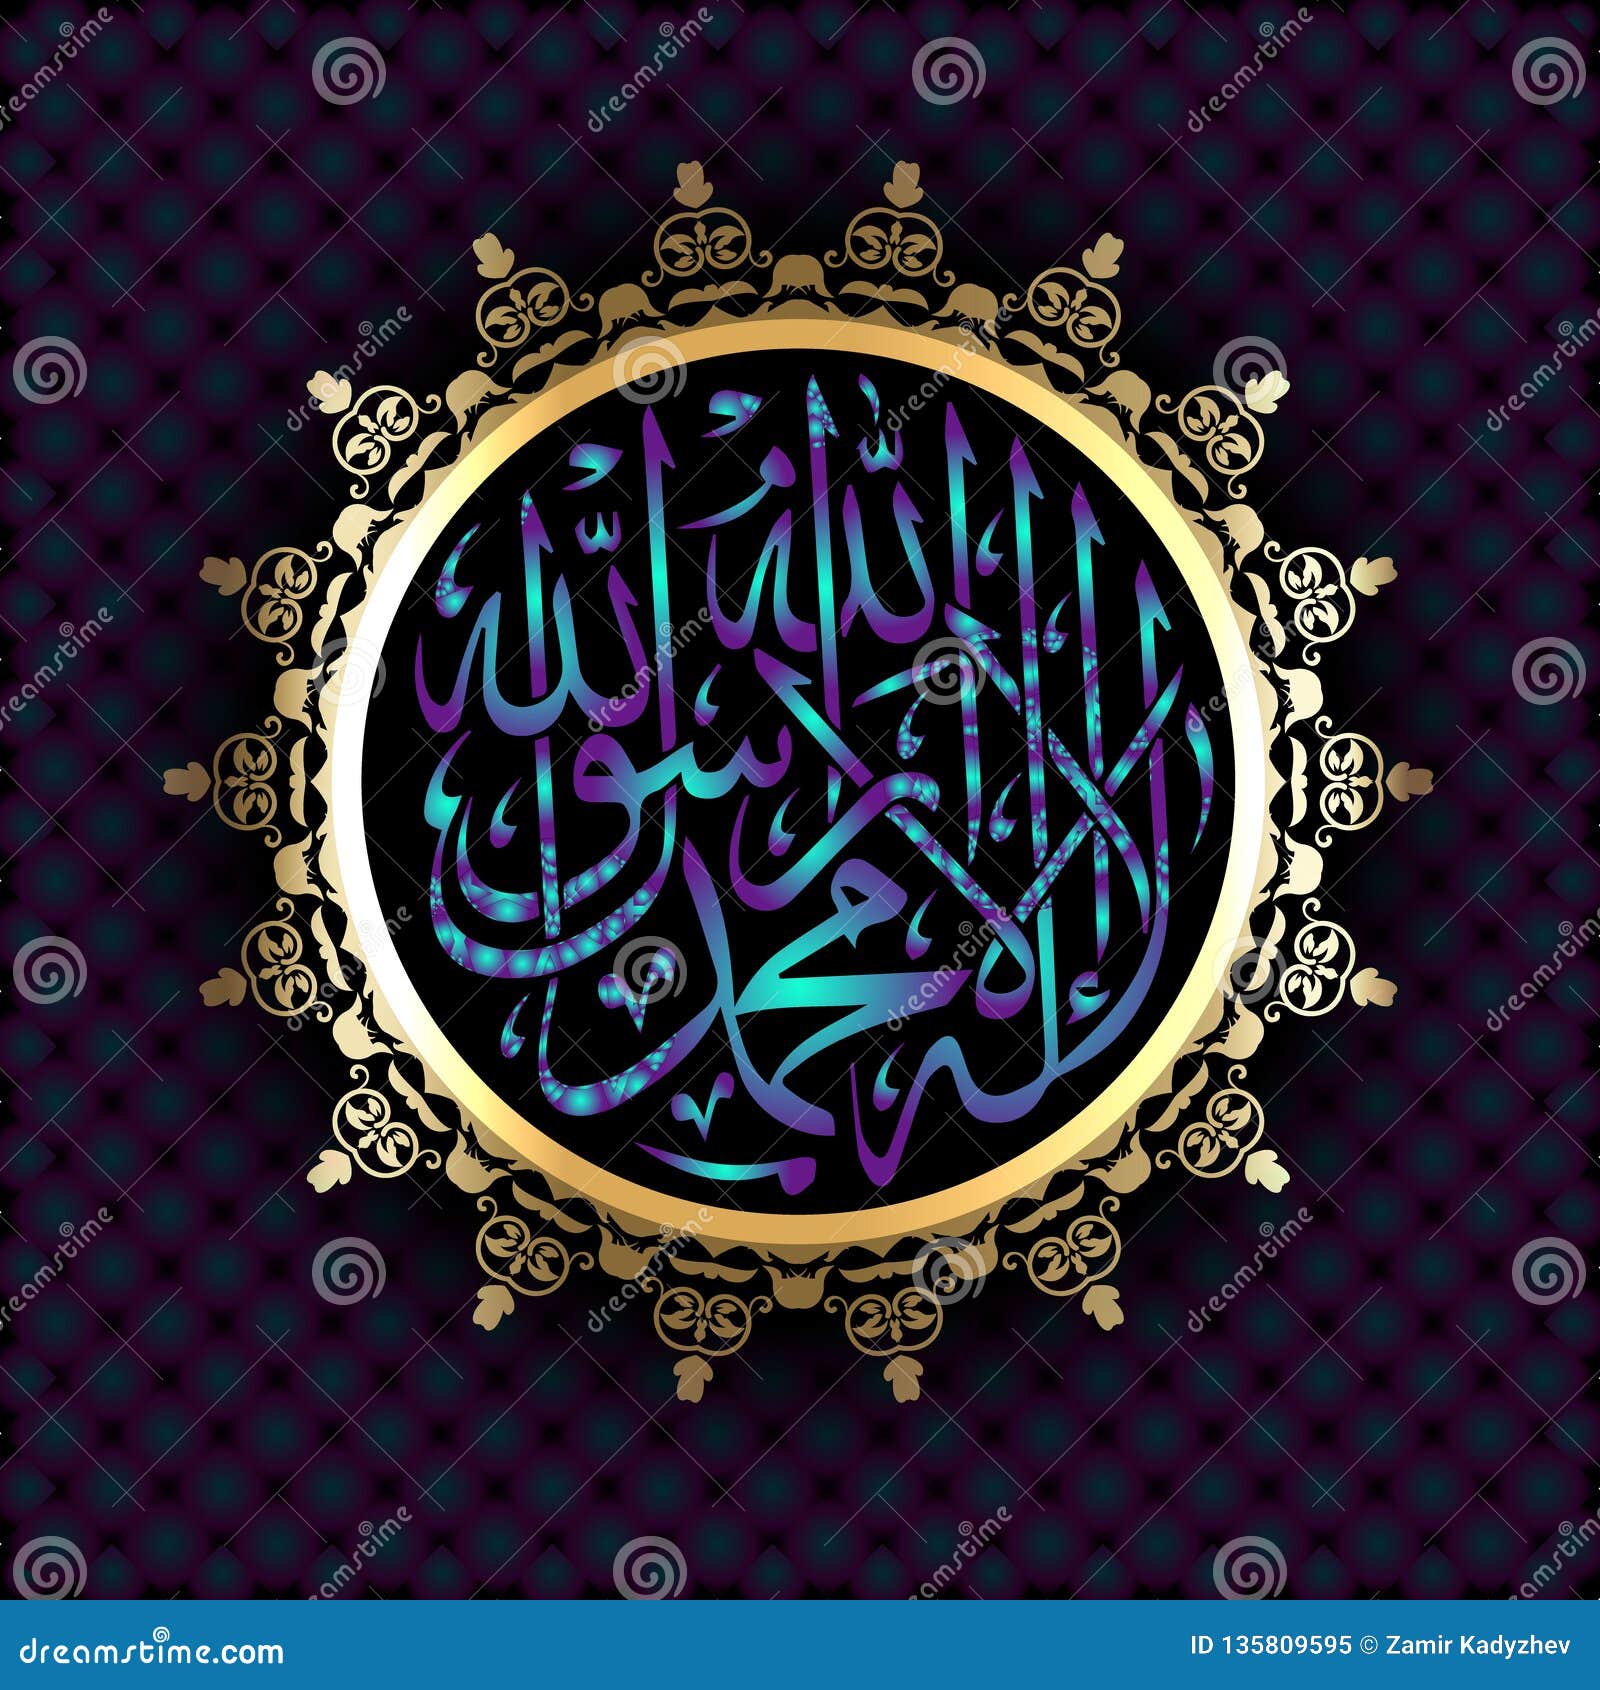 la-ilaha-illallah-muhammadur-rasulullah for the  of islamic holidays. this colligraphy means there is no god worthy of wors